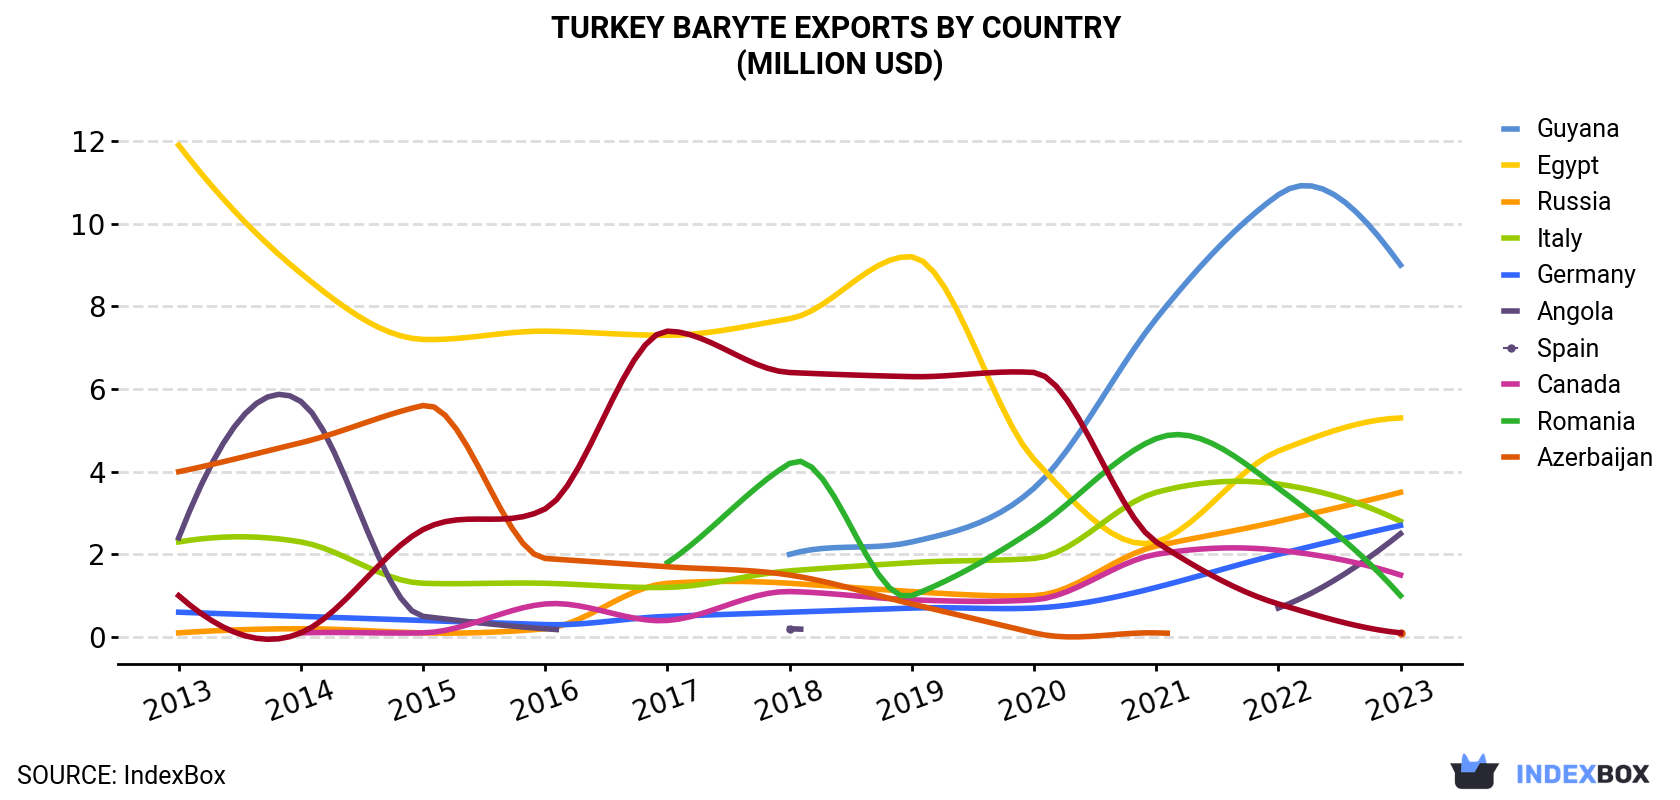 Turkey Baryte Exports By Country (Million USD)